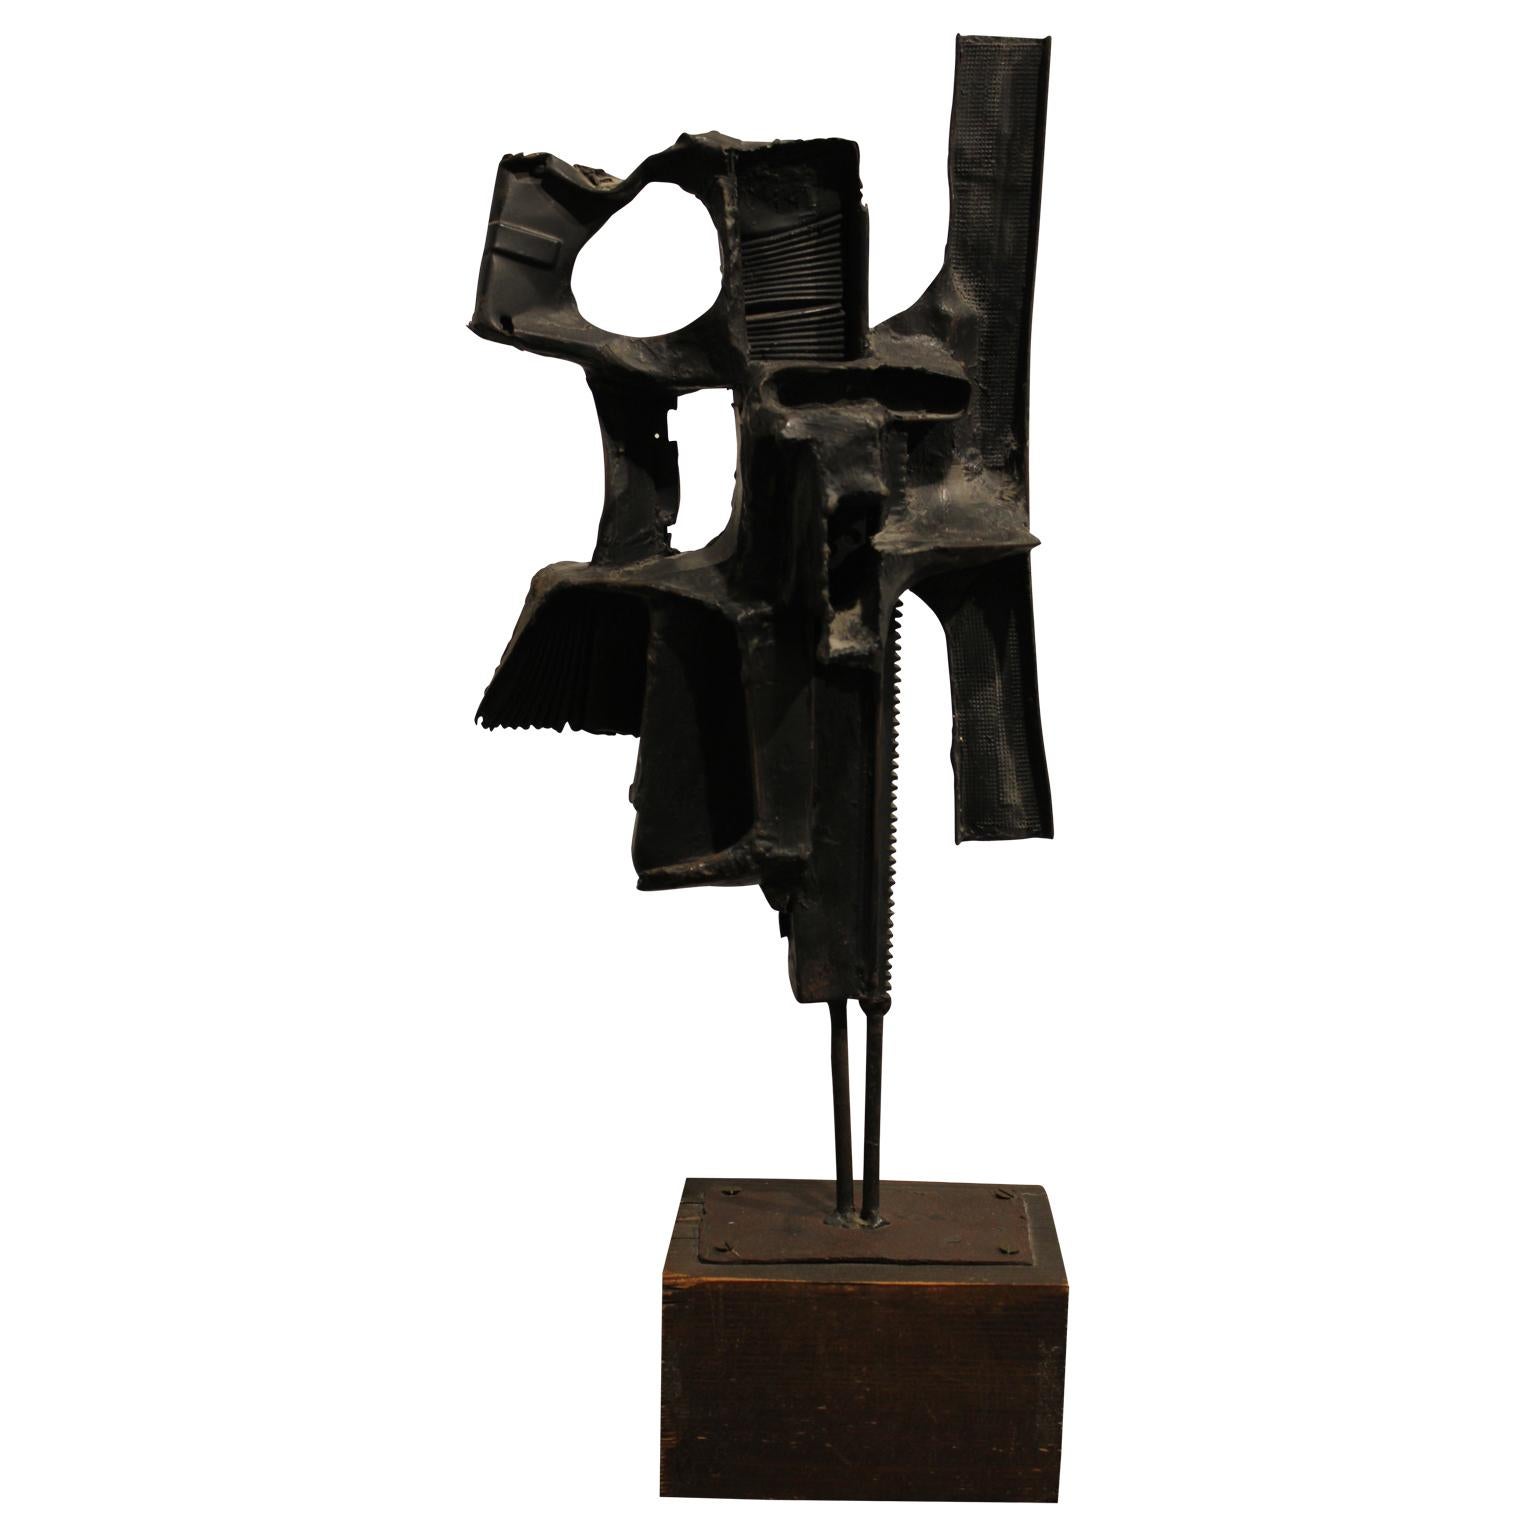 William D. Willis Abstract Sculpture - "Weatherform" Trench Art Sculptor Made from Gun Parts